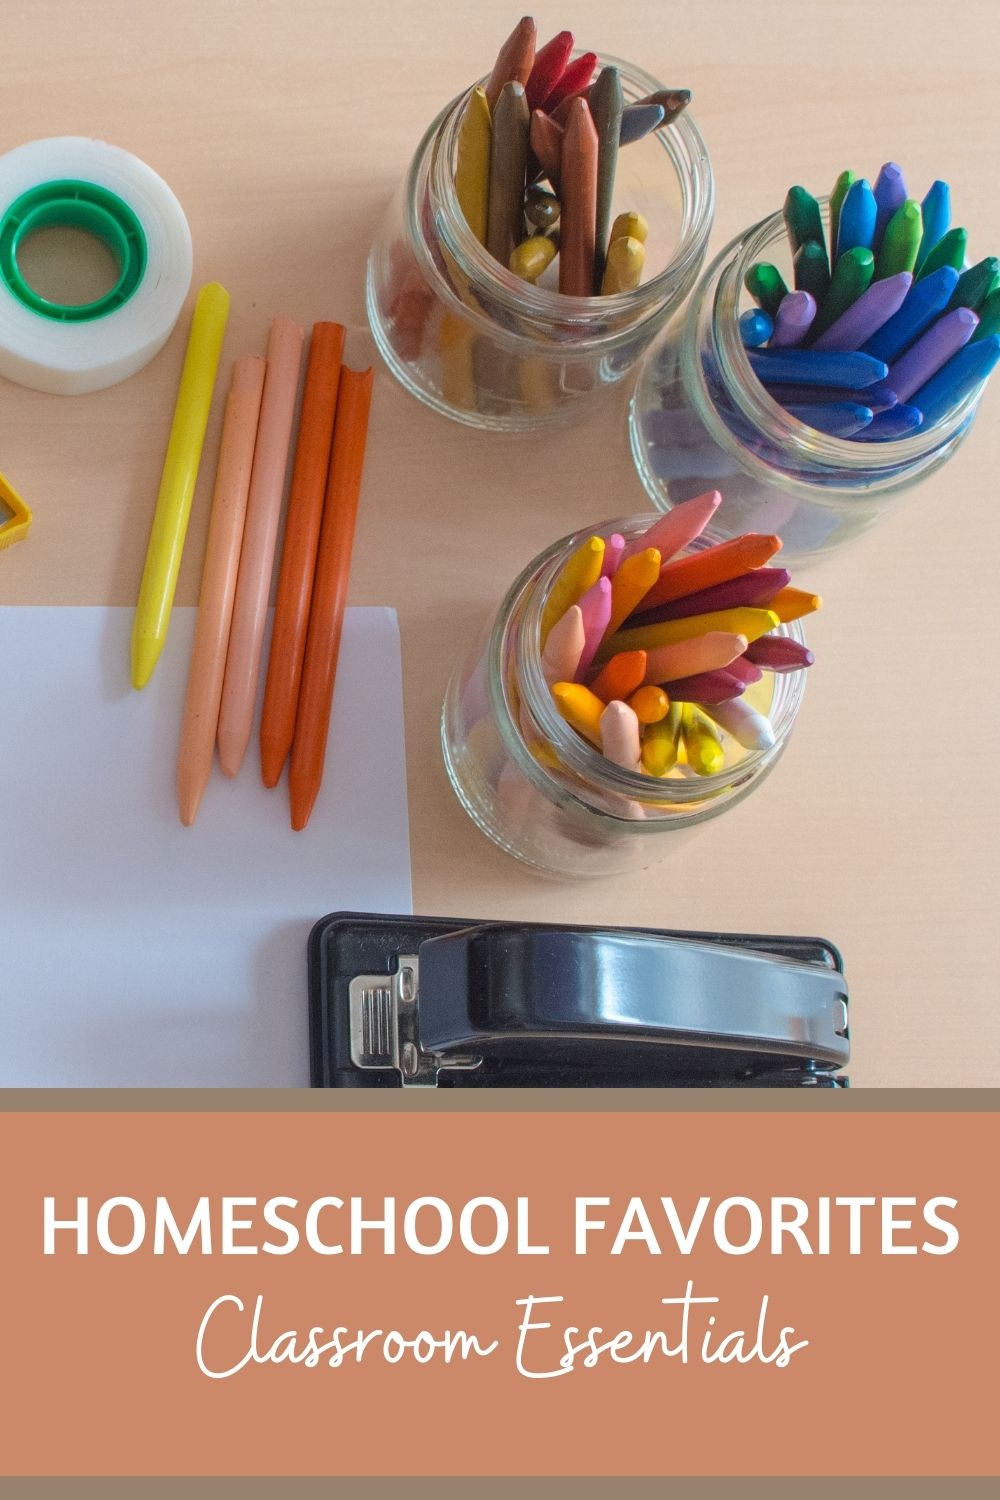 Homeschoolers can easily go overboard when it comes to classroom supplies. I'm sharing some of the items that myself and others rely on most.